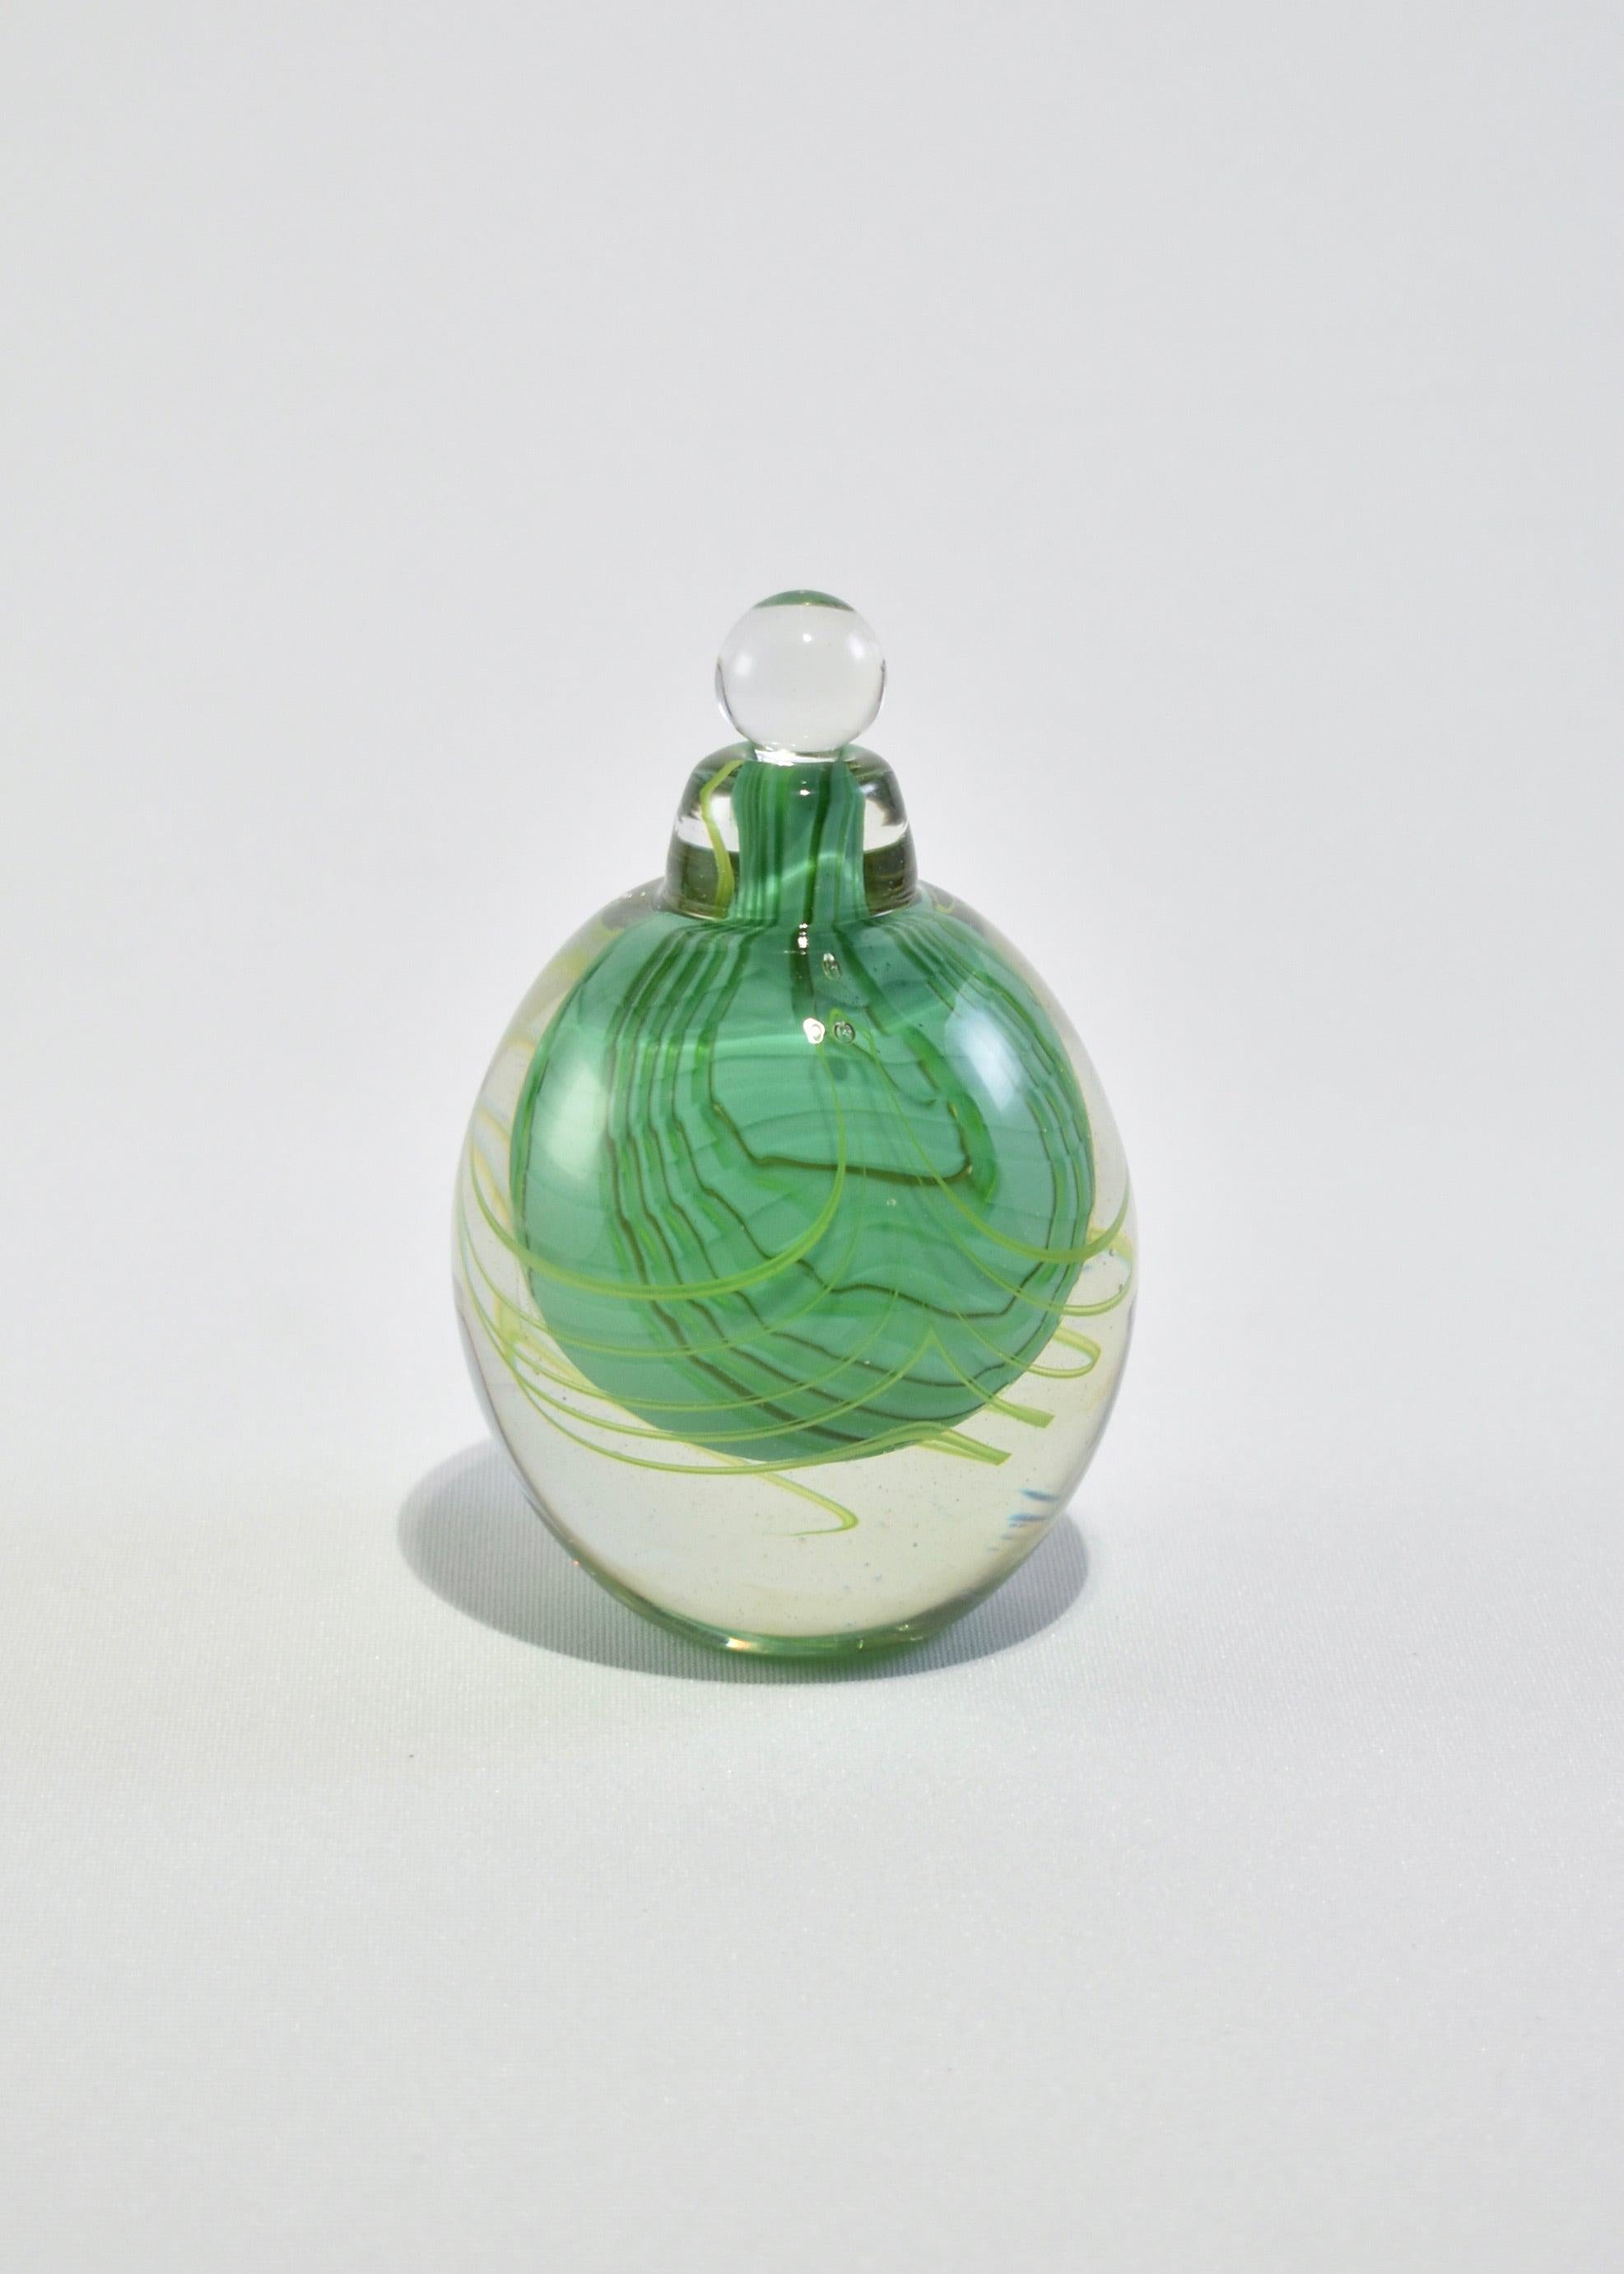 Stunning blown glass perfume bottle with abstract design. Signed on base.